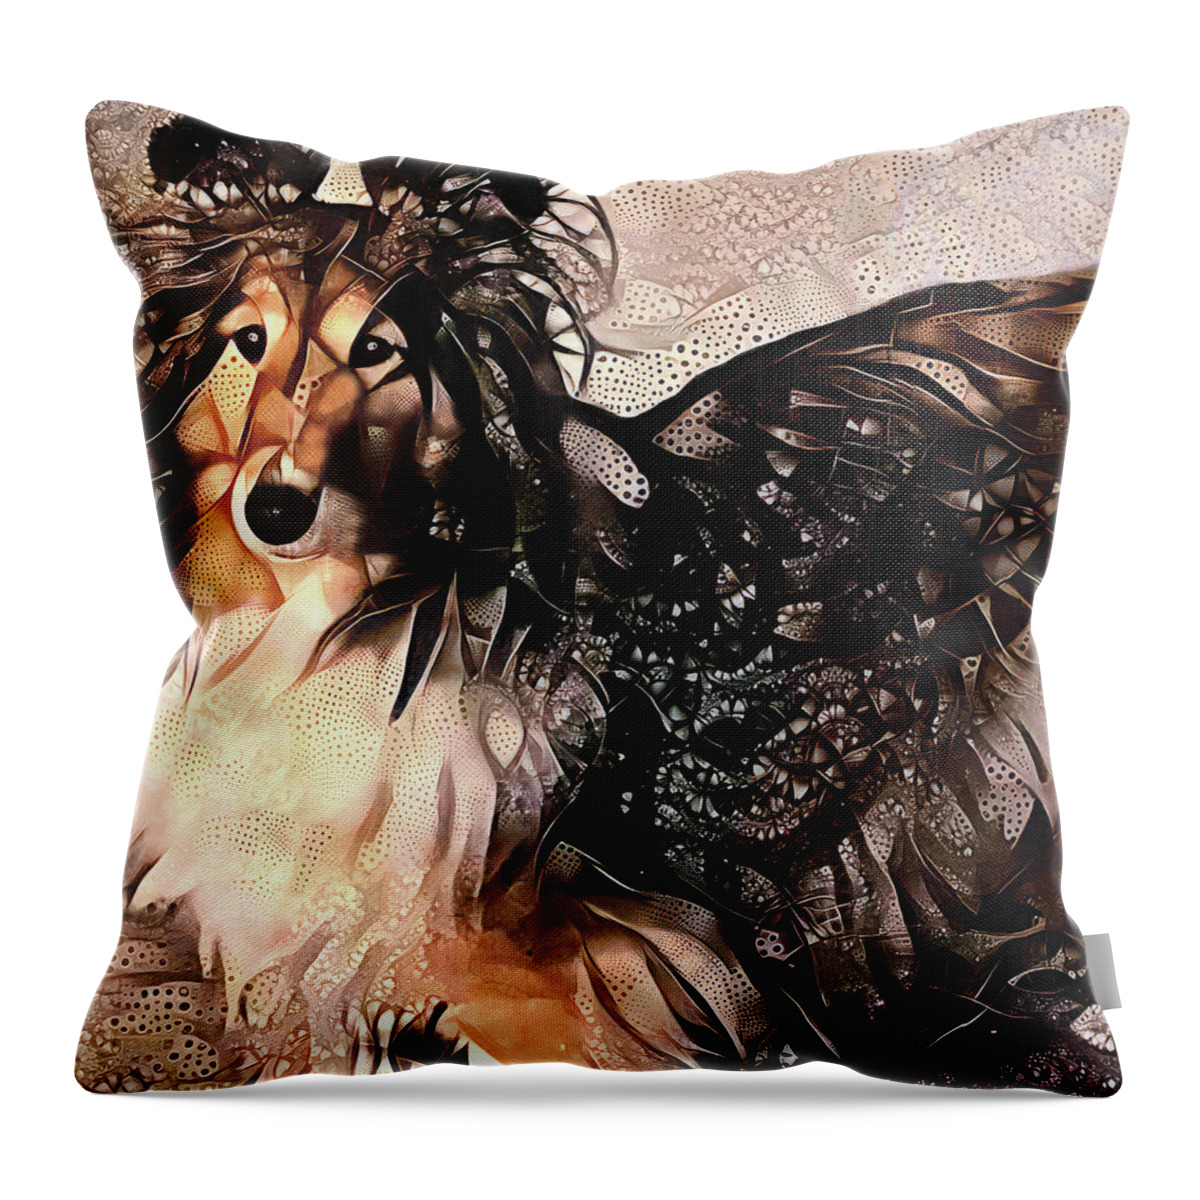 Shelties Throw Pillow featuring the digital art A Sheltie Named Boots by Peggy Collins